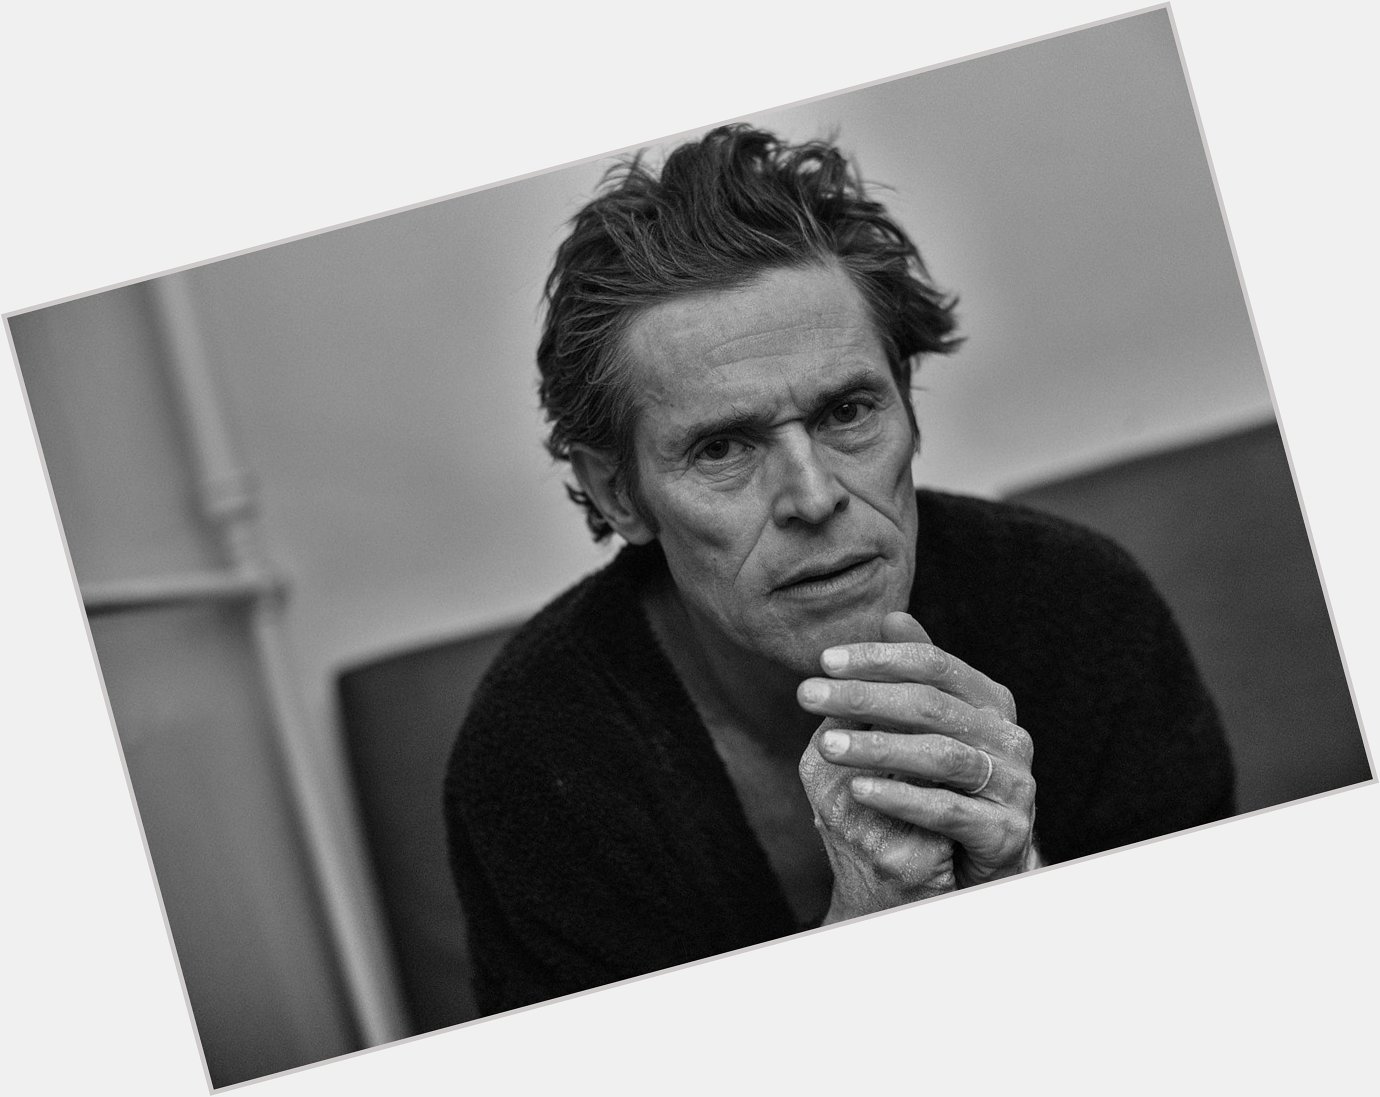 Happy birthday Willem Dafoe! The bad guy with a thousand faces turns 60 today 